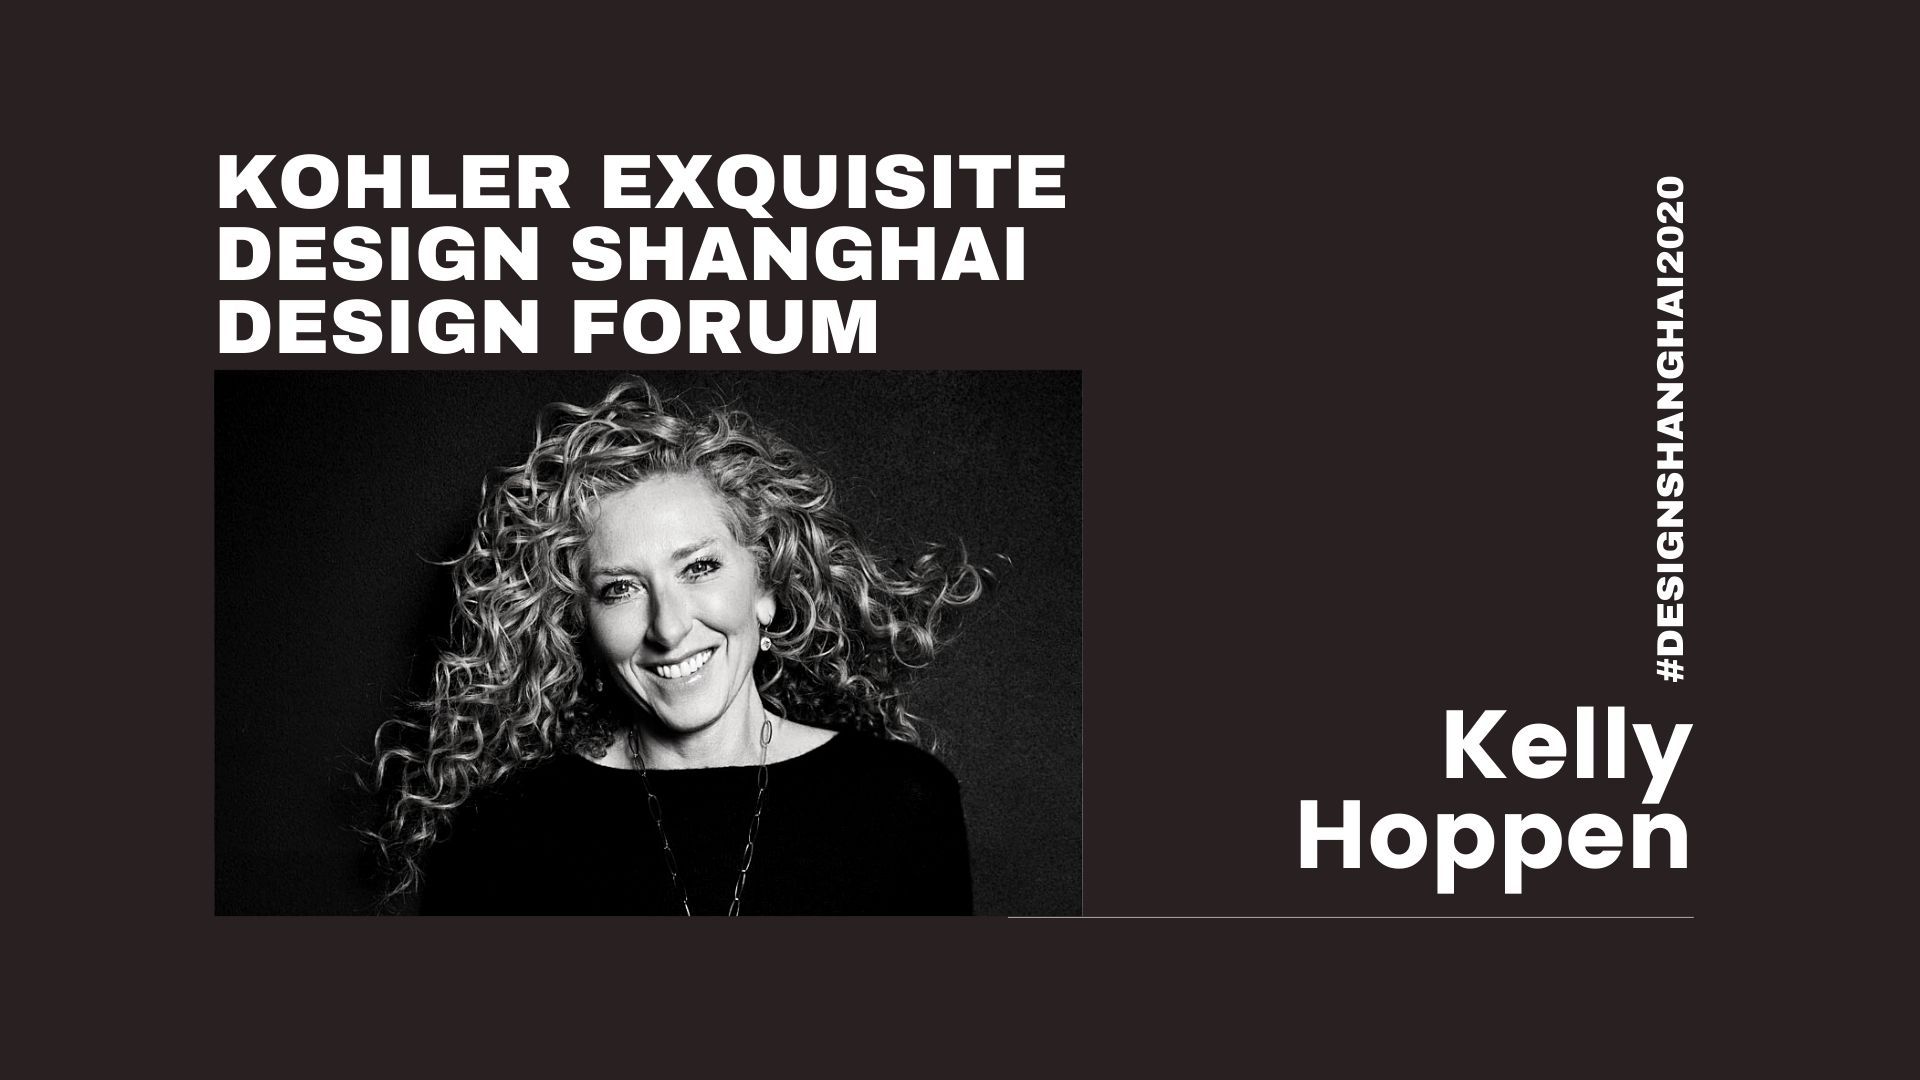 Kelly Hoppen: Designs For A Post-Covid World